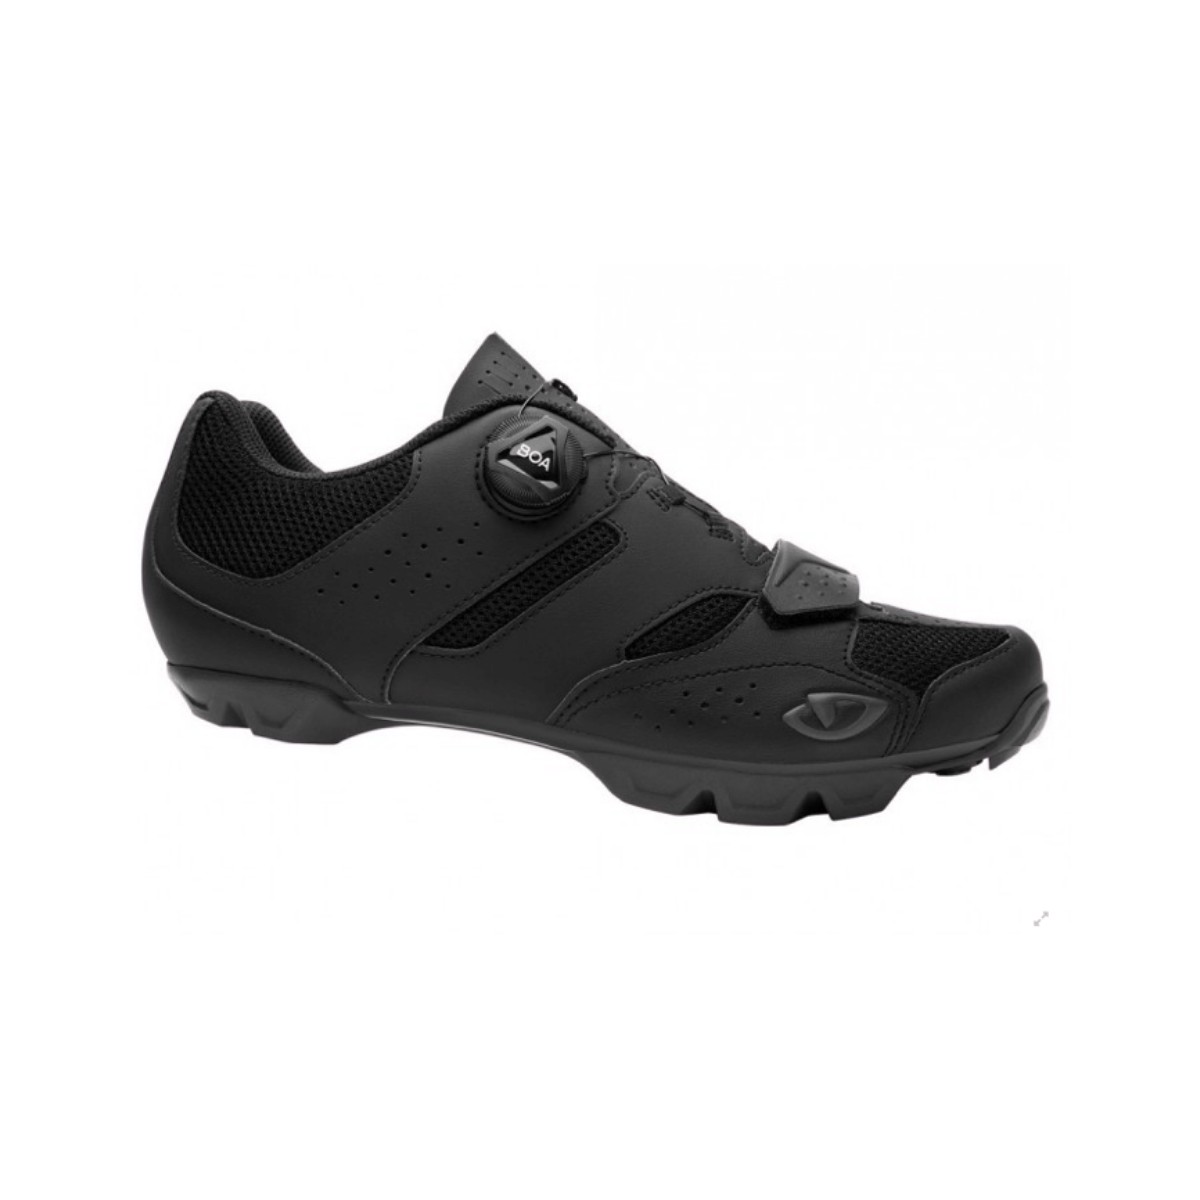 Chaussures Giro Cylindre II Noir, Taille 40 - EUR